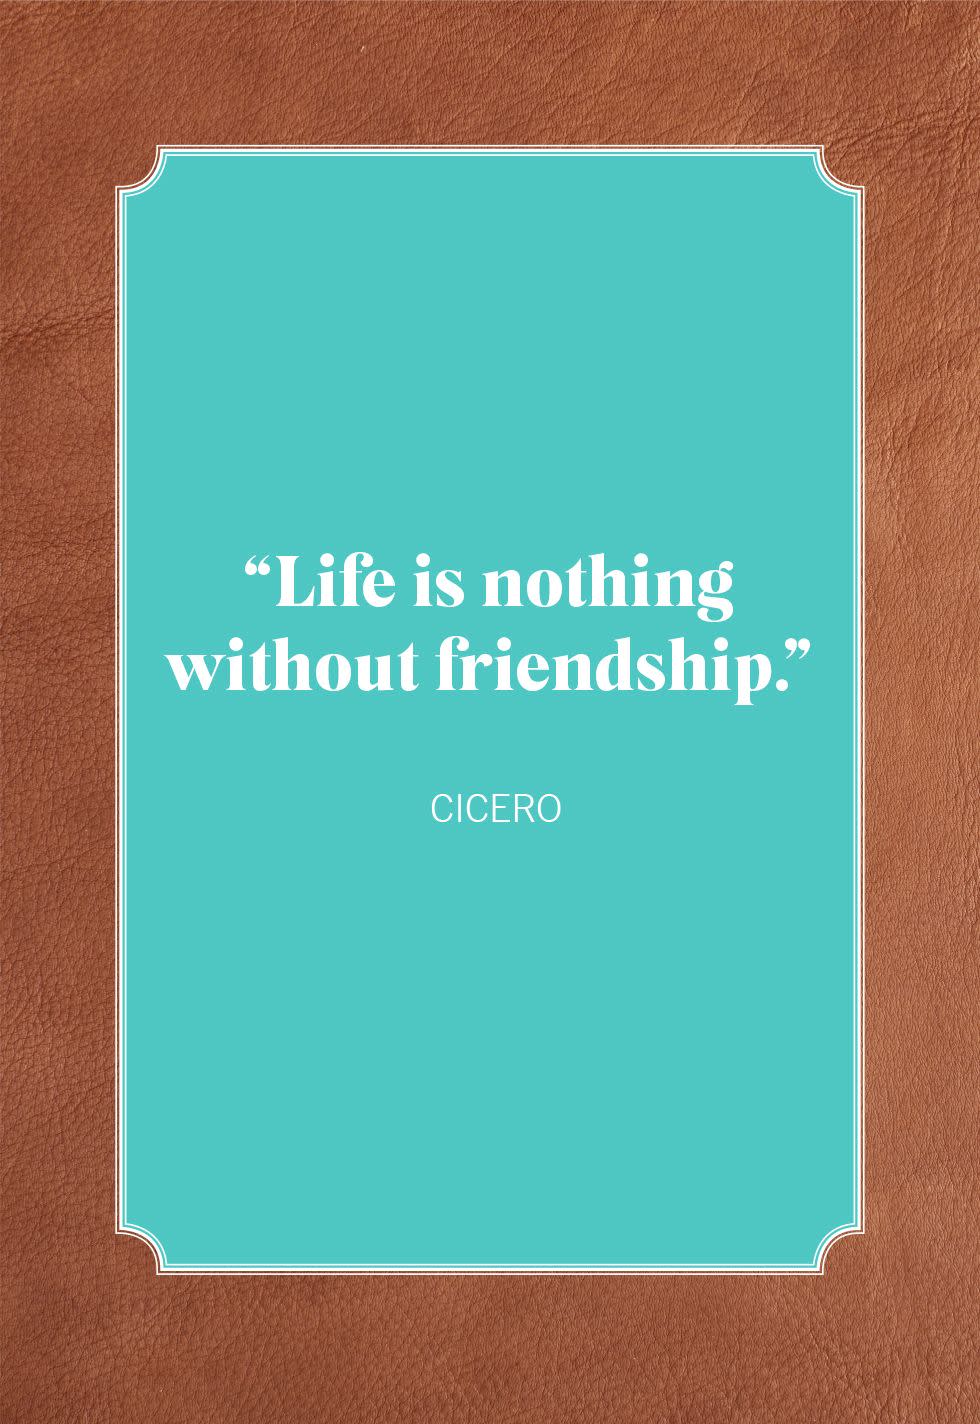 cicero valentines day quotes for friends